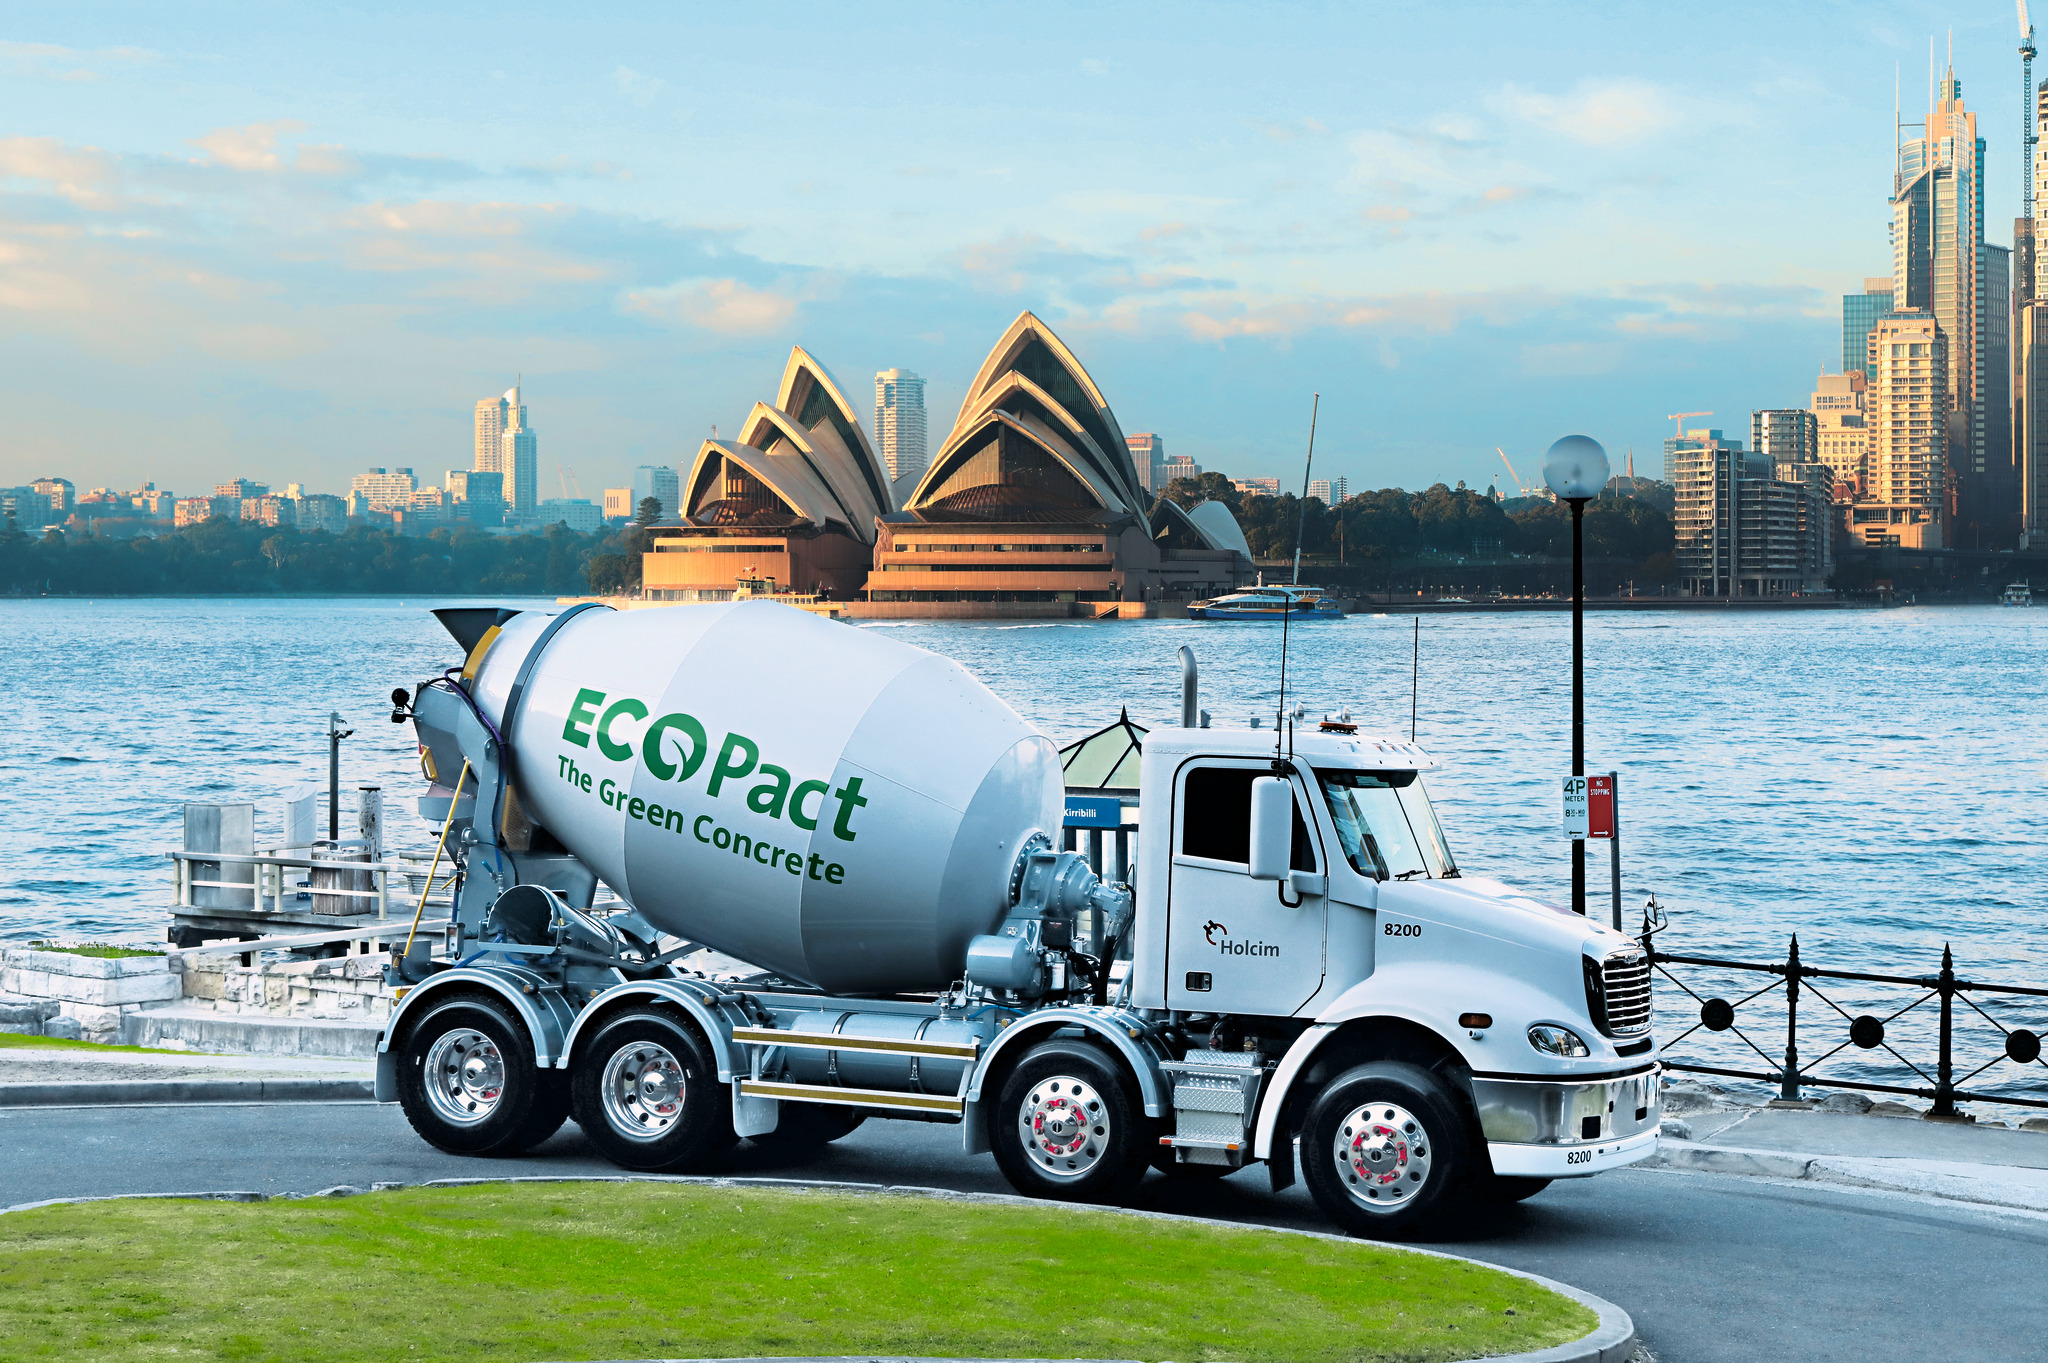 A concrete truck labeled with "ECOPact, The Green Concrete," with the Syndey Opera House and harbor in the background. 